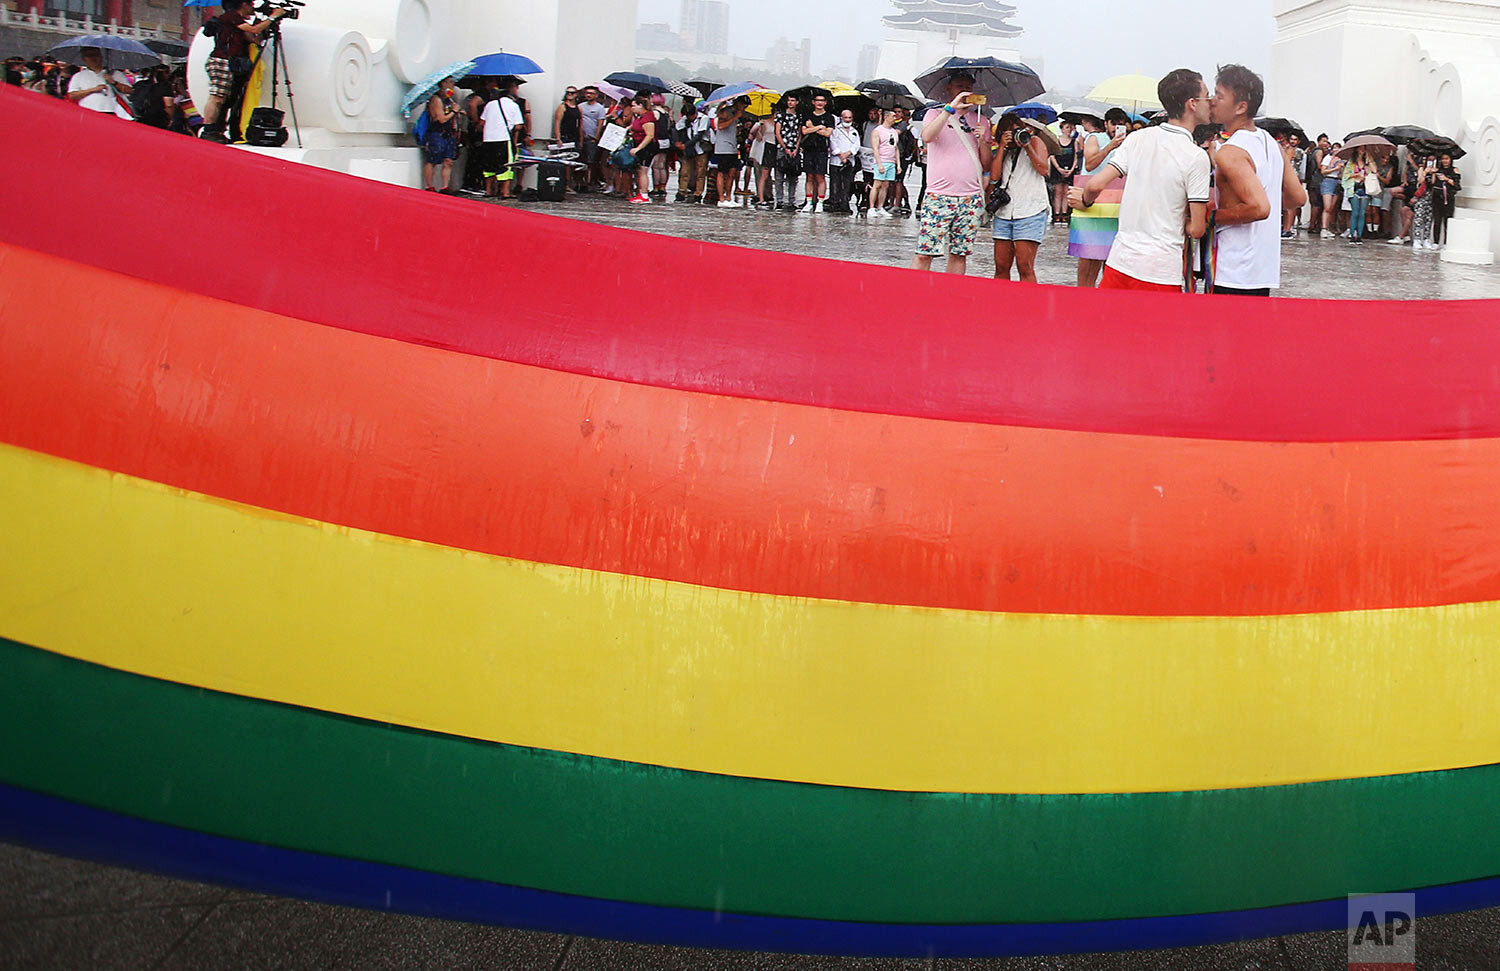  Participants march during the "Taiwan Pride March for the World!" at Liberty Square at the CKS Memorial Hall in Taipei, Taiwan, Sunday, June 28, 2020.  (AP Photo/Chiang Ying-ying) 